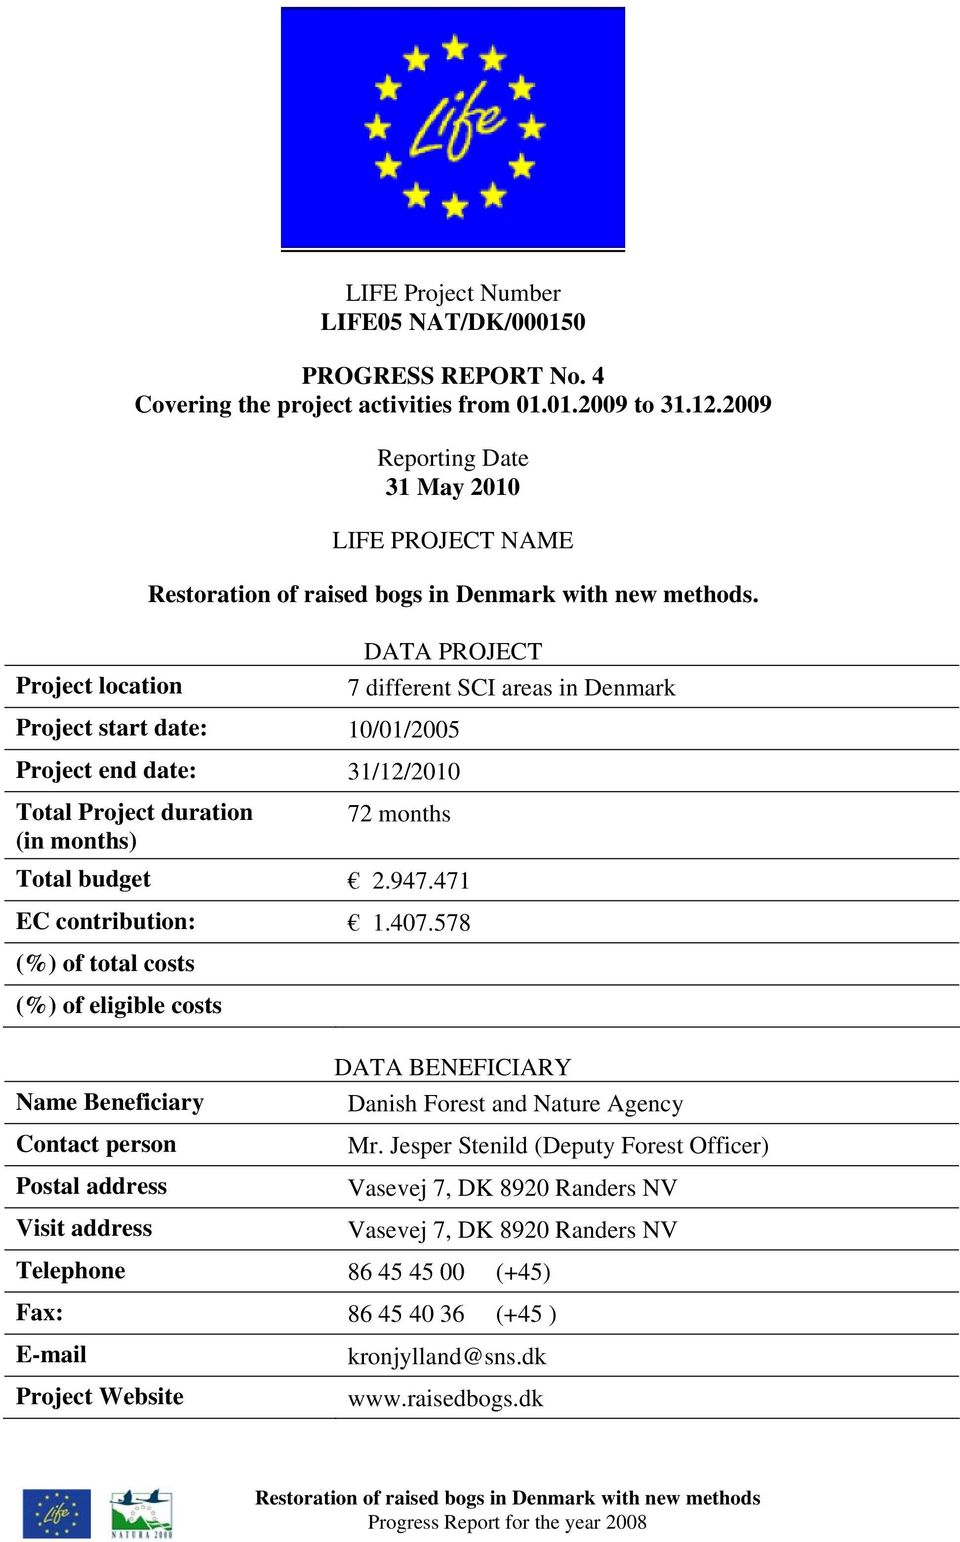 Project location DATA PROJECT 7 different SCI areas in Denmark Project start date: 10/01/2005 Project end date: 31/12/2010 Total Project duration (in months) 72 months Total budget 2.947.